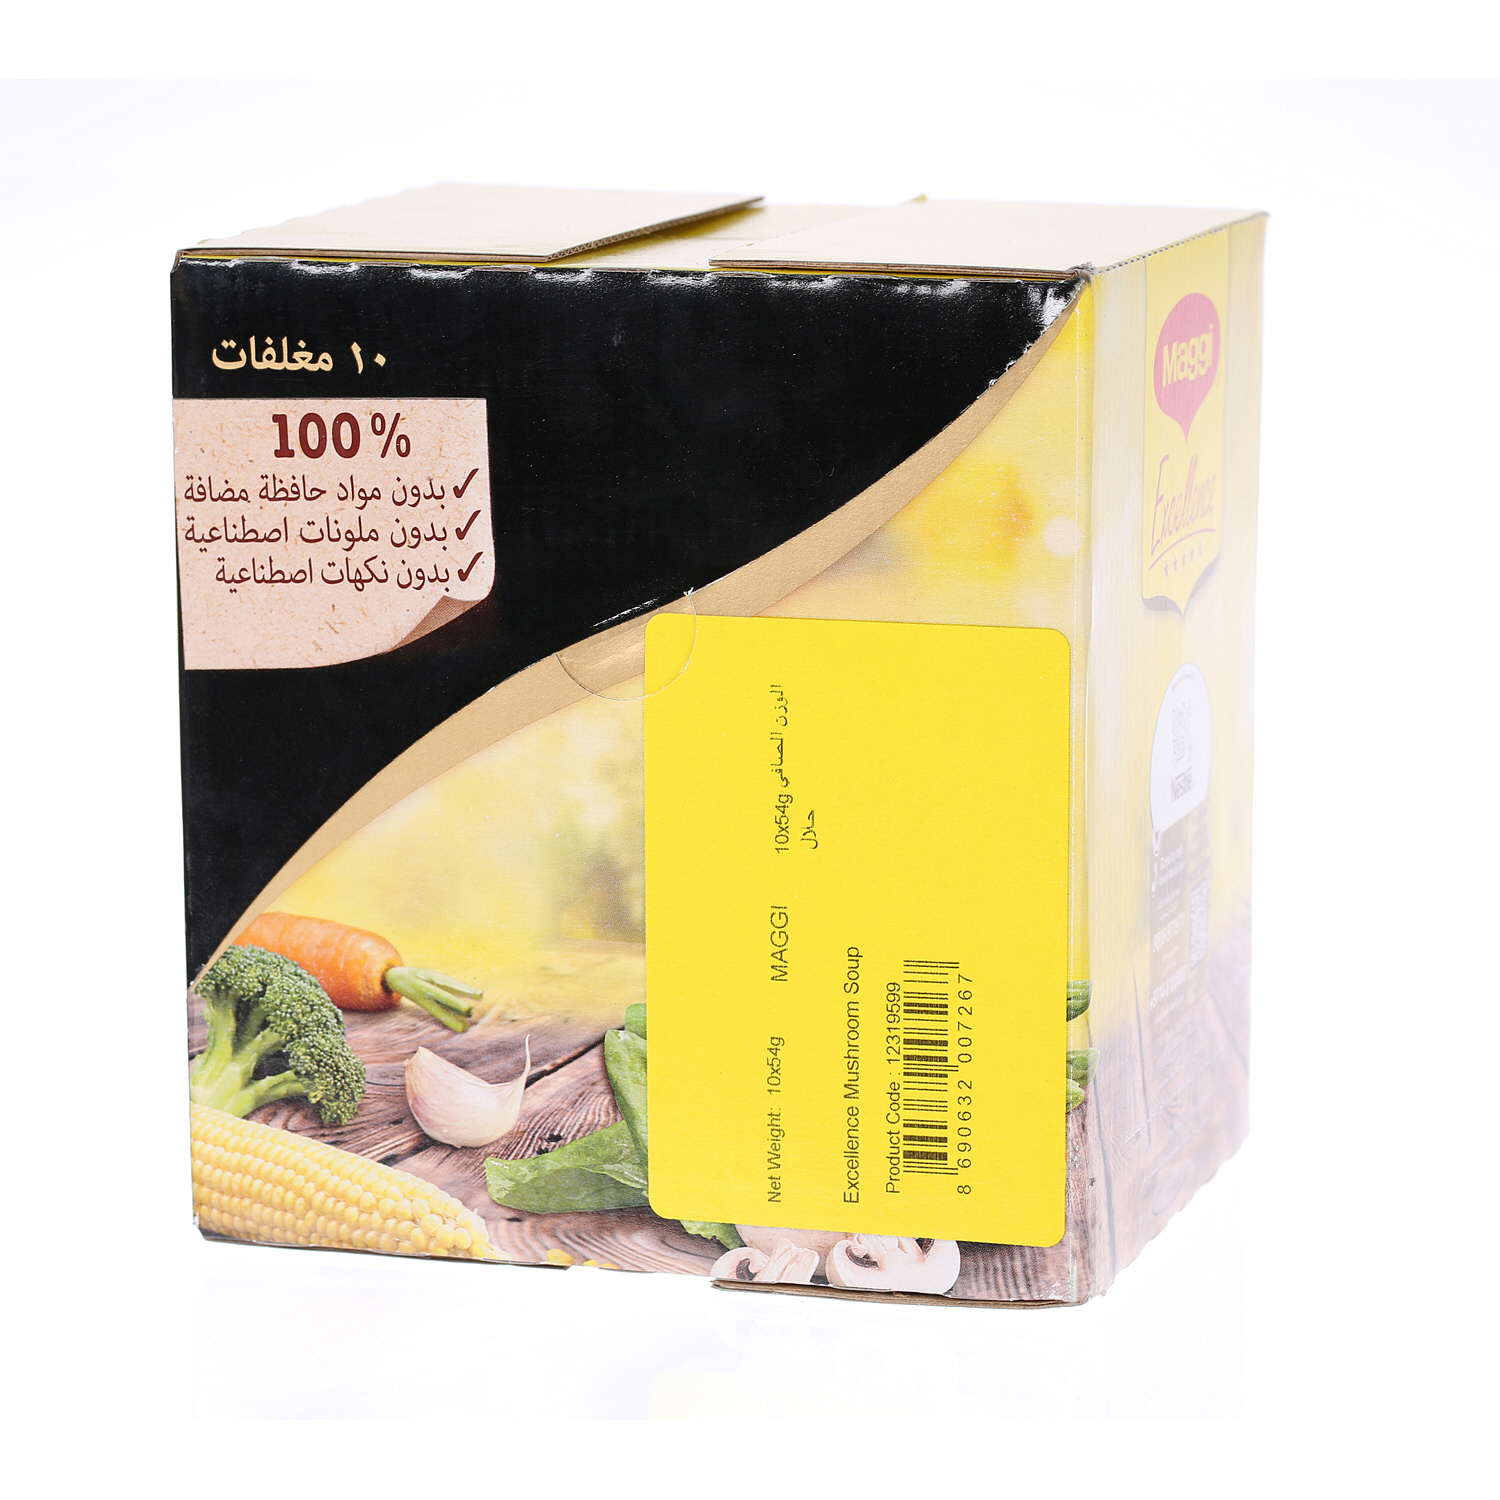 Maggi Excellence Mushroom Soup 45 g × 10 Pack